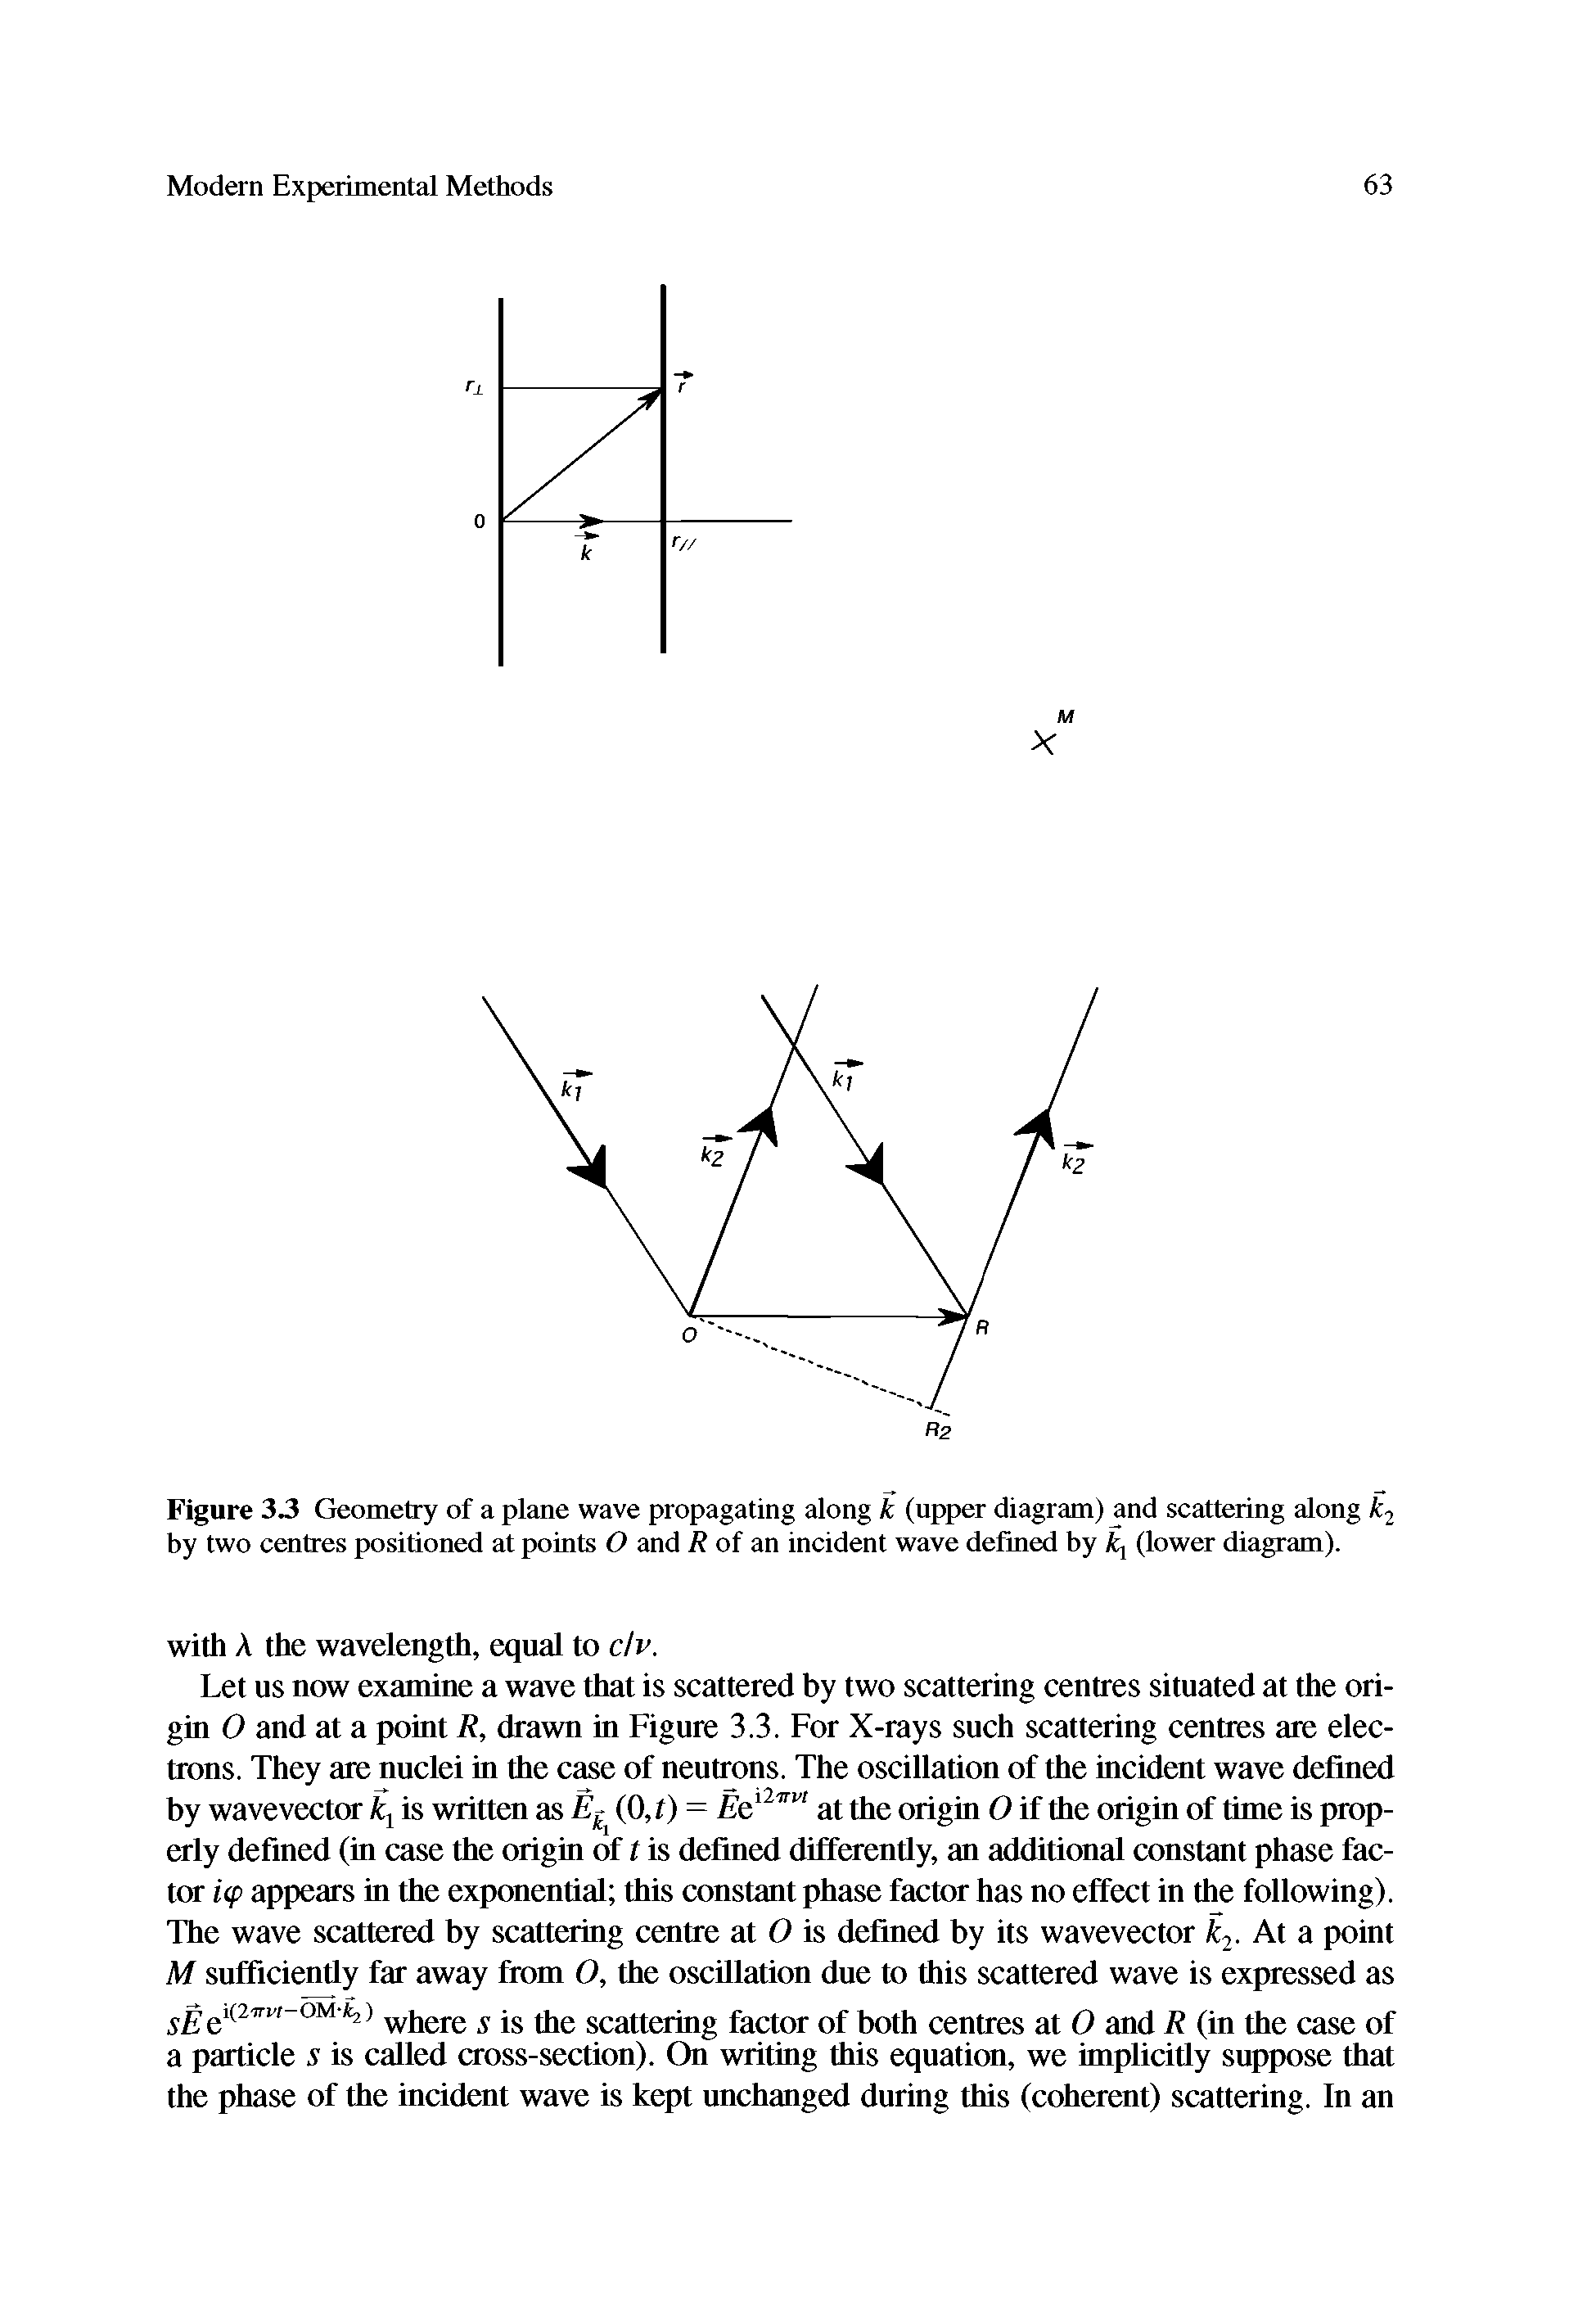 Figure 33 Geometry of a plane wave propagating along k (upper diagram) and scattering along fcj by two centres positioned at points O and R of an incident wave defined by (lower diagram).